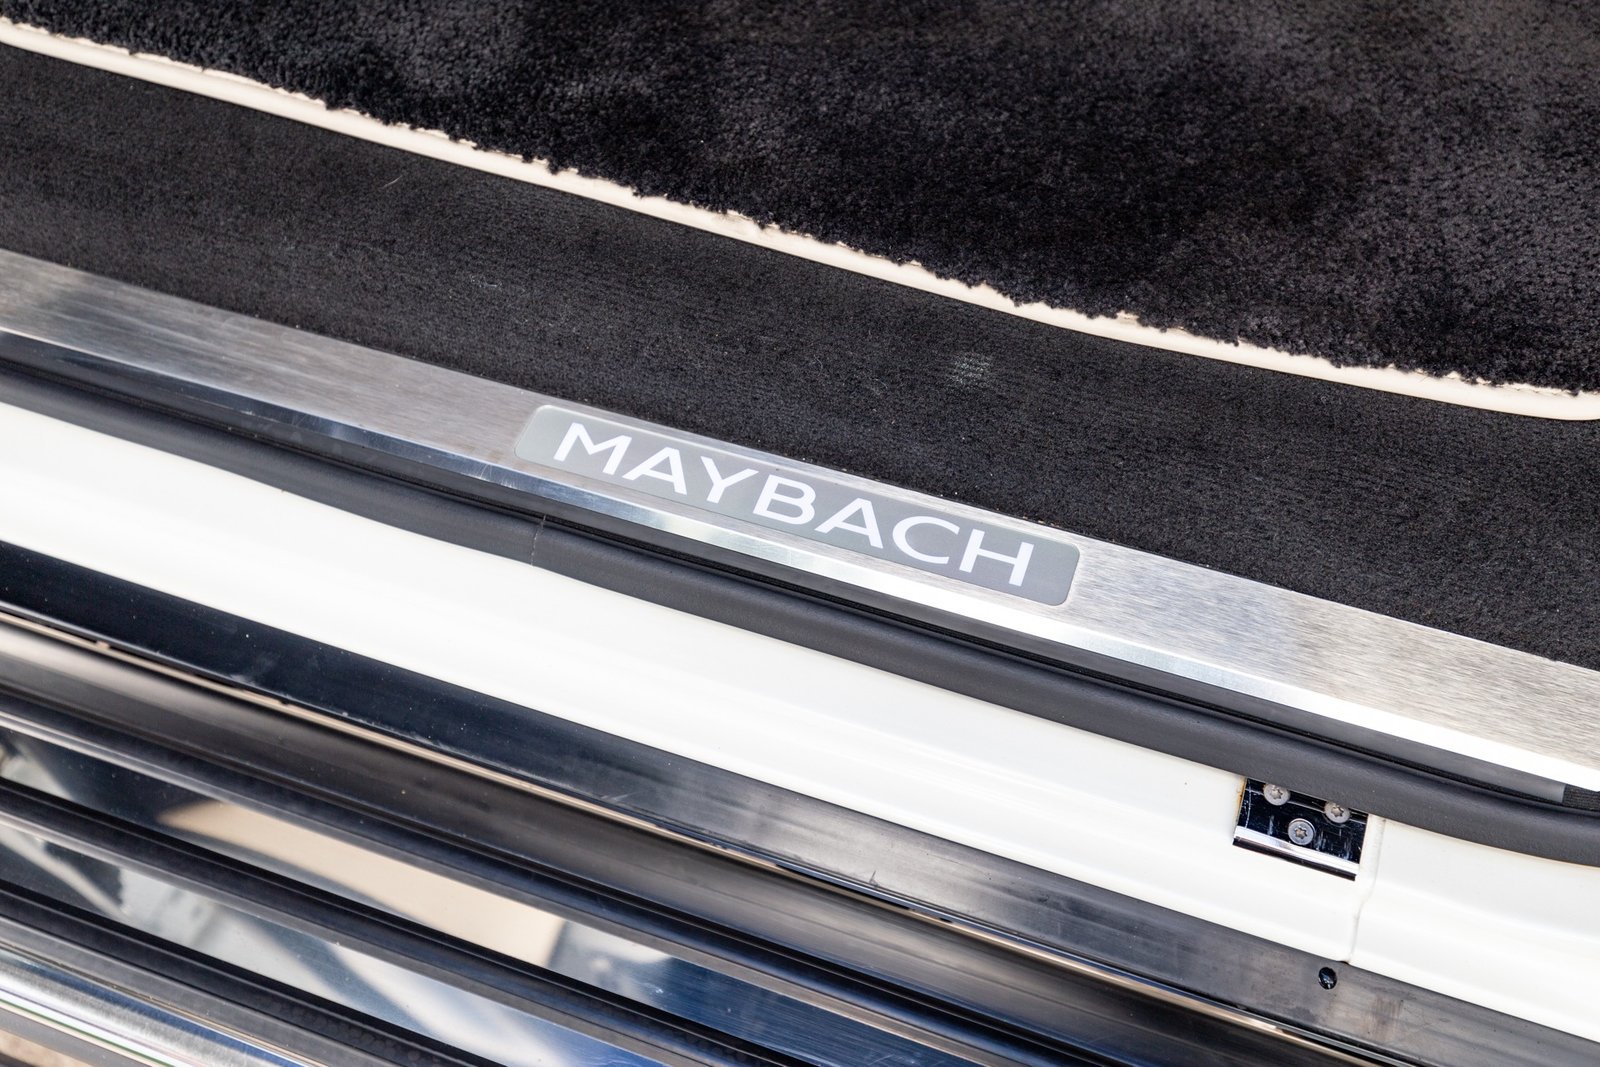 Used 2018 Mercedes-Benz G650 Maybach (43)